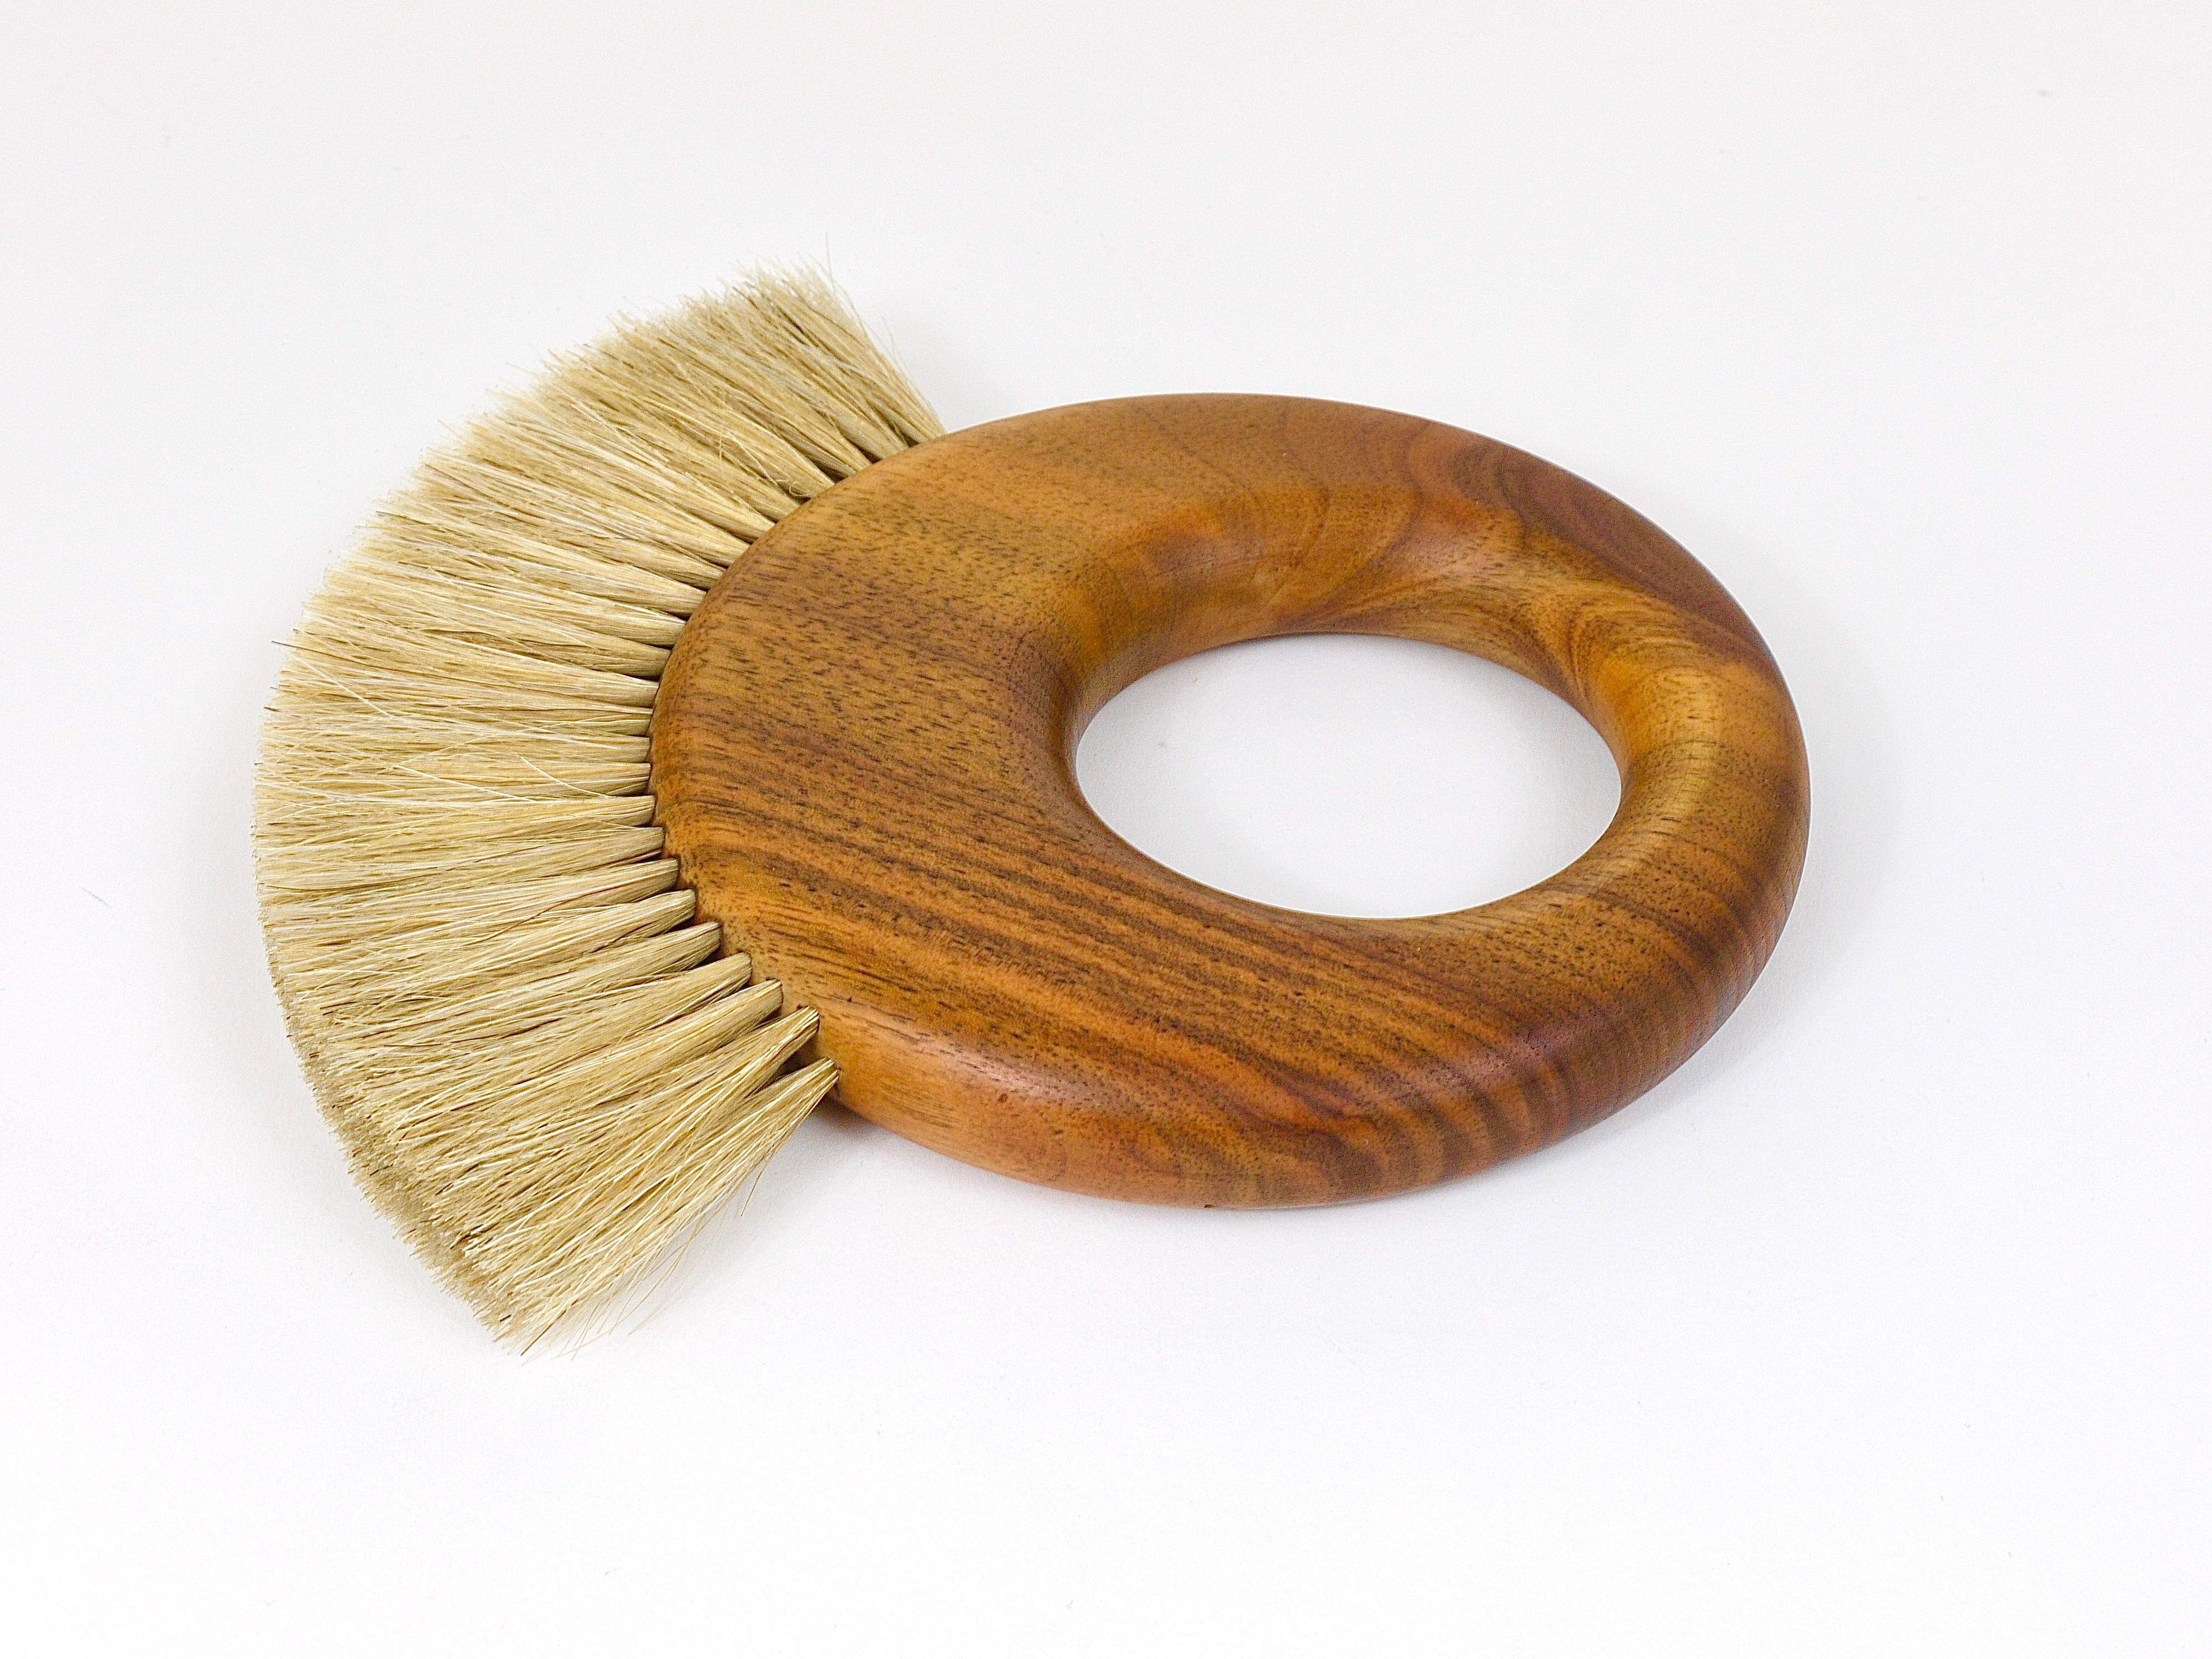 Large Carl Aubock Midcentury Walnut Ring Clothes Brush, Austria, 1950s For Sale 1